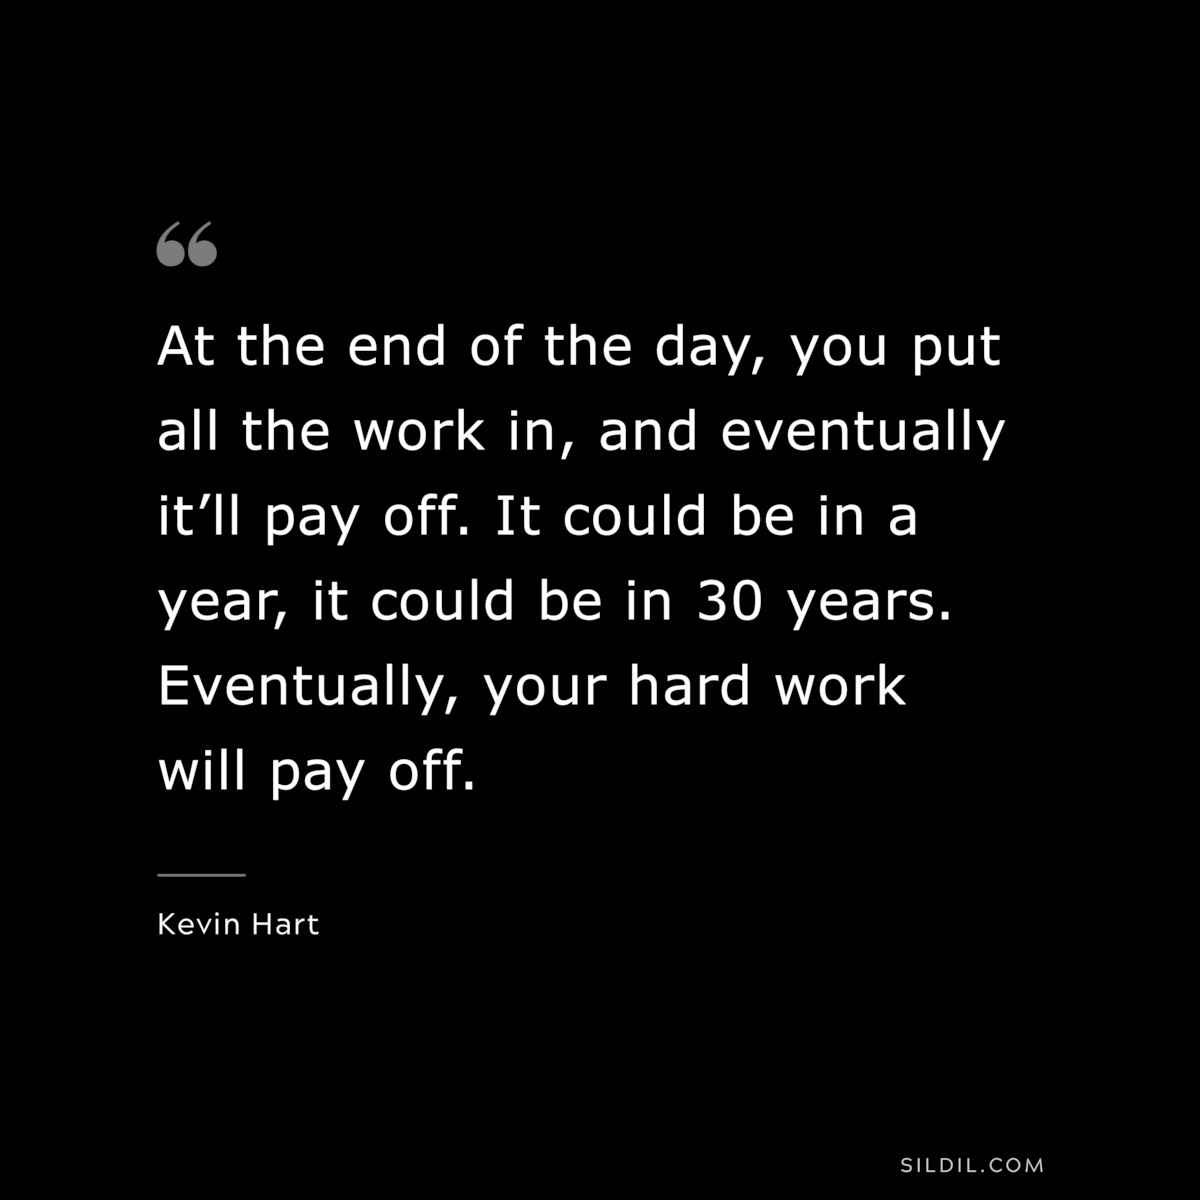 At the end of the day, you put all the work in, and eventually it’ll pay off. It could be in a year, it could be in 30 years. Eventually, your hard work will pay off. ― Kevin Hart